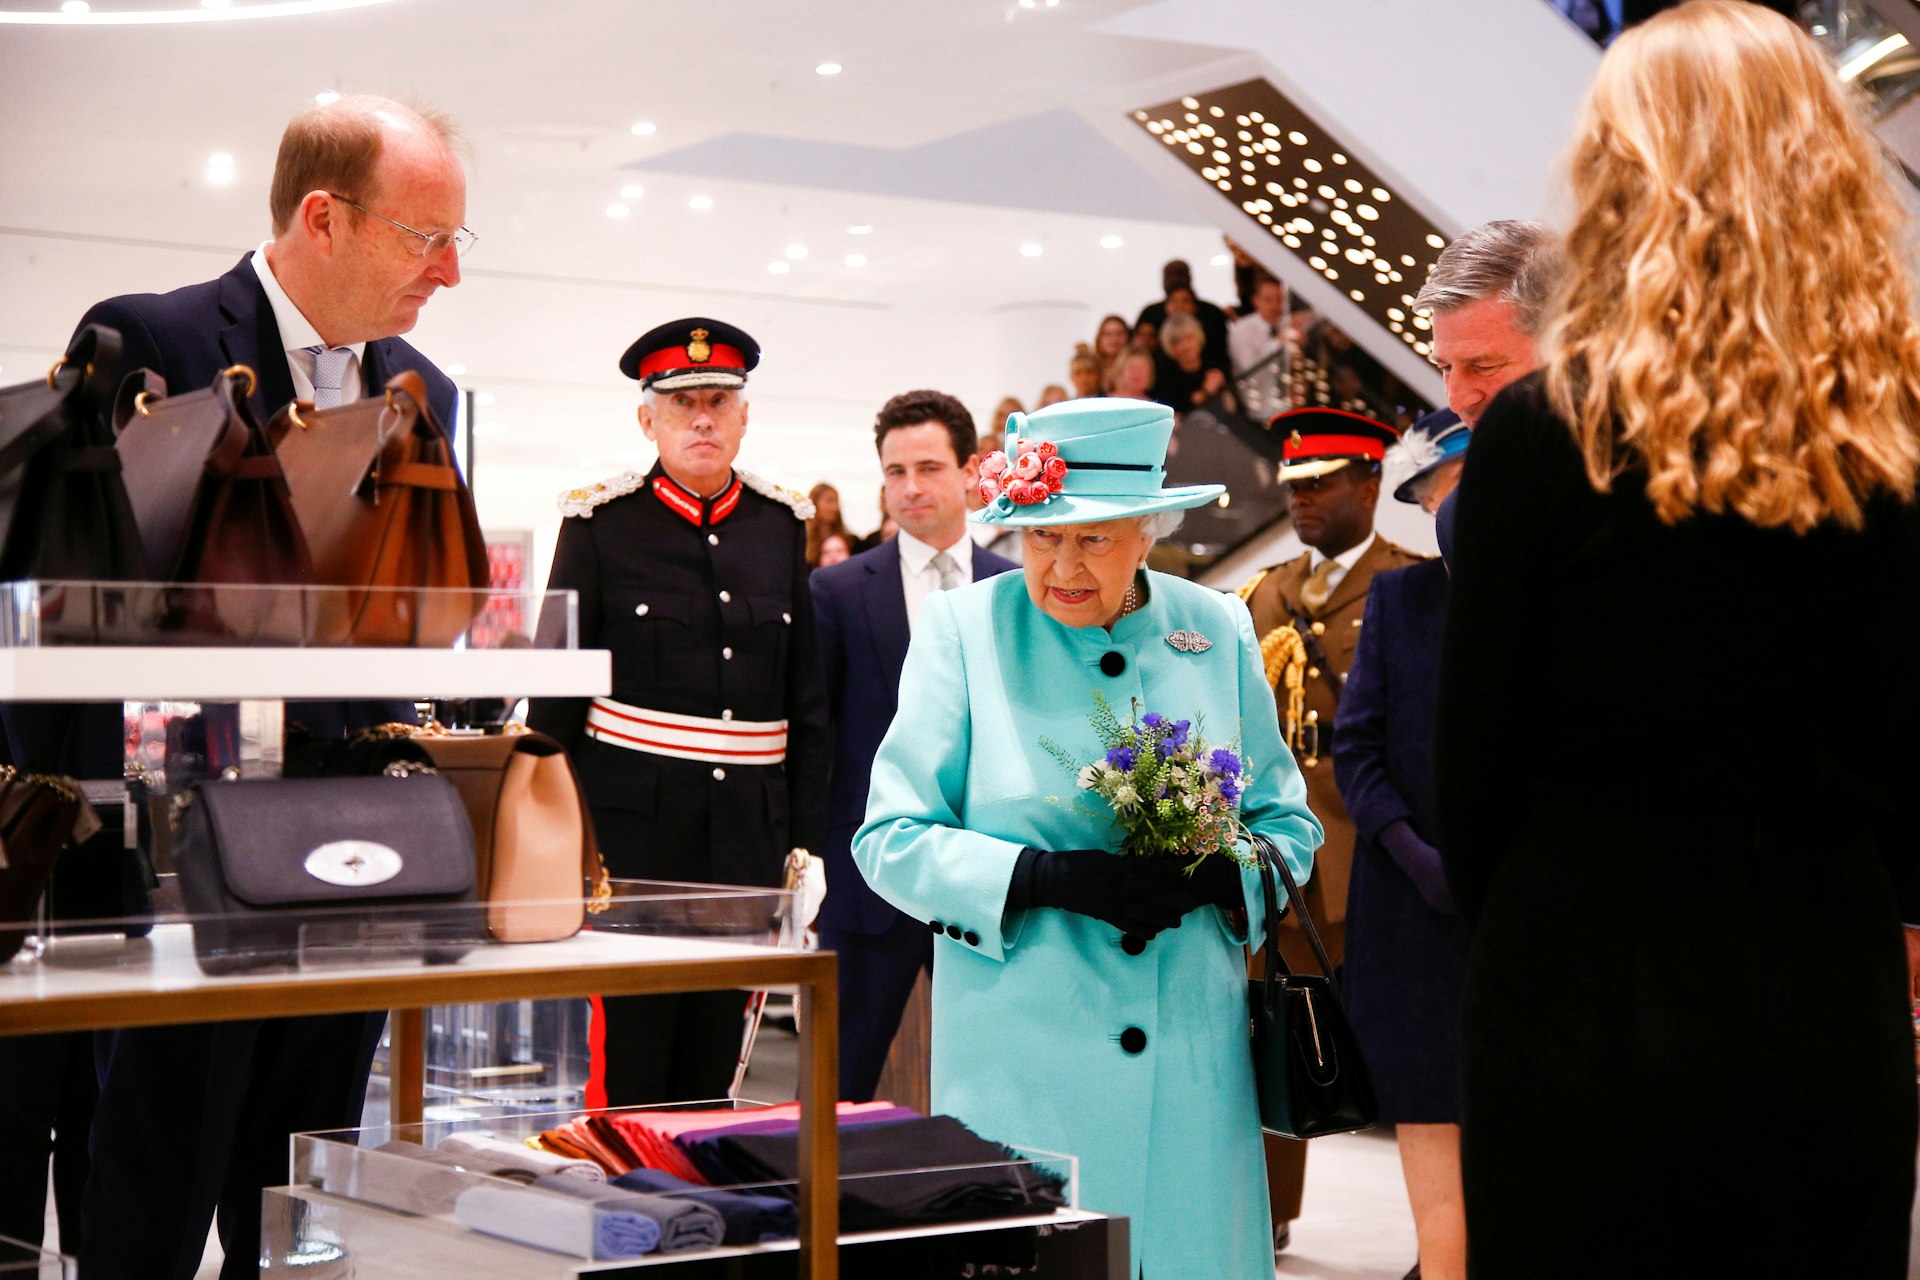 Queen Elizabeth II, wearing a blue coat and matching hat, looks on at handbags in a hightstreet retailer. 